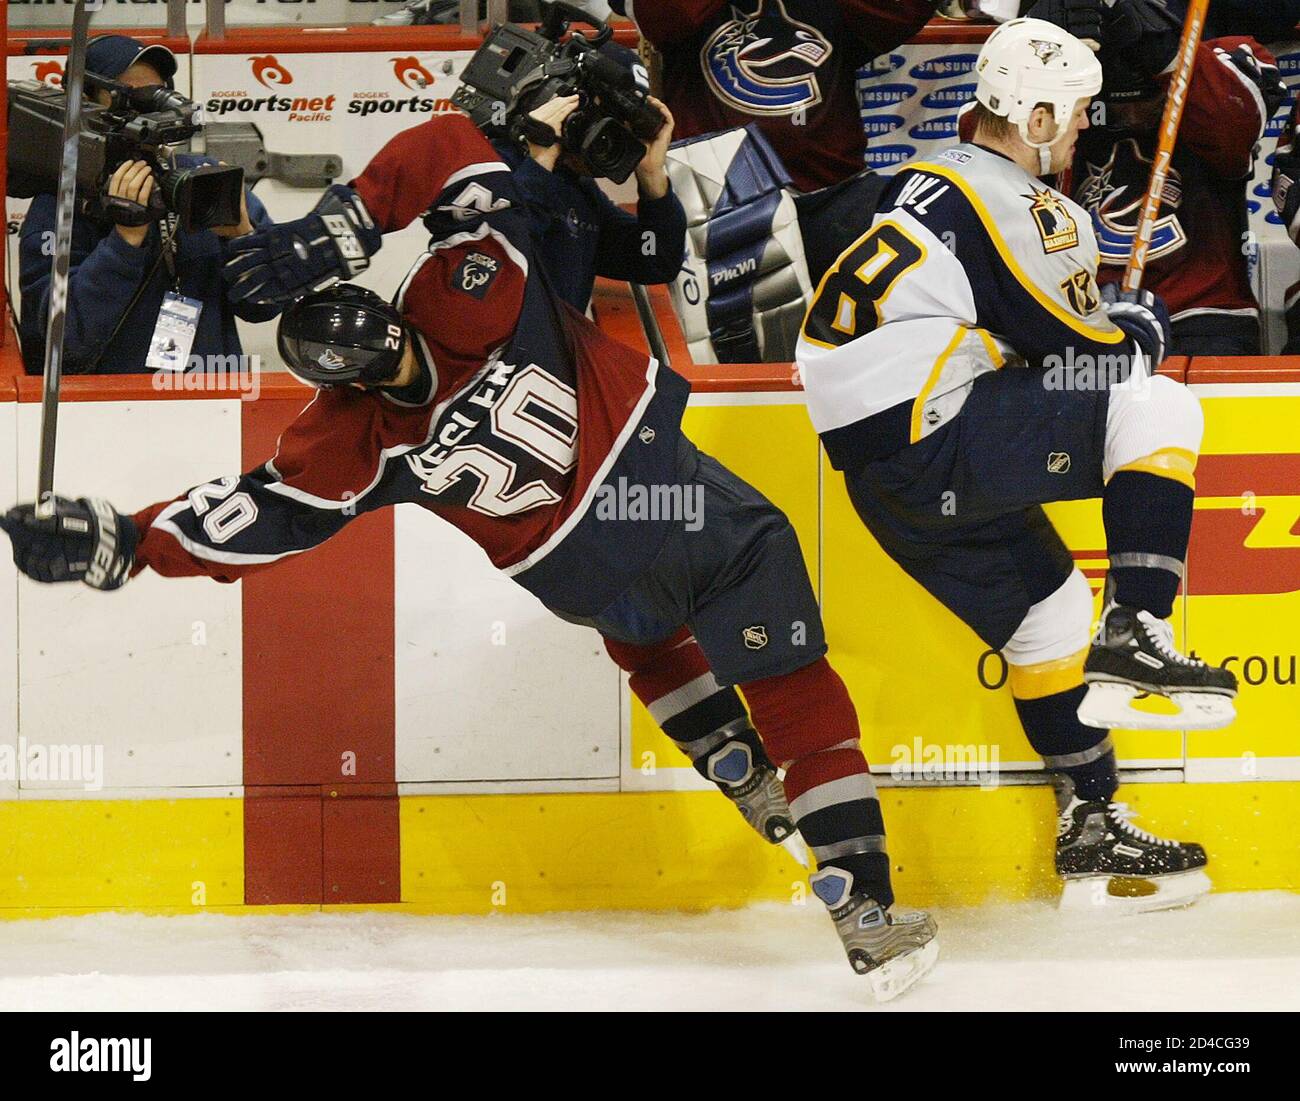 vancouver-canucksryan-kesler-l-is-checked-by-nashville-predatorsadam-hall-during-the-second-period-of-their-nhl-game-in-vancouver-british-columbia-march-16-2004-reuterslyle-stafford-ls-2D4CG39.jpg